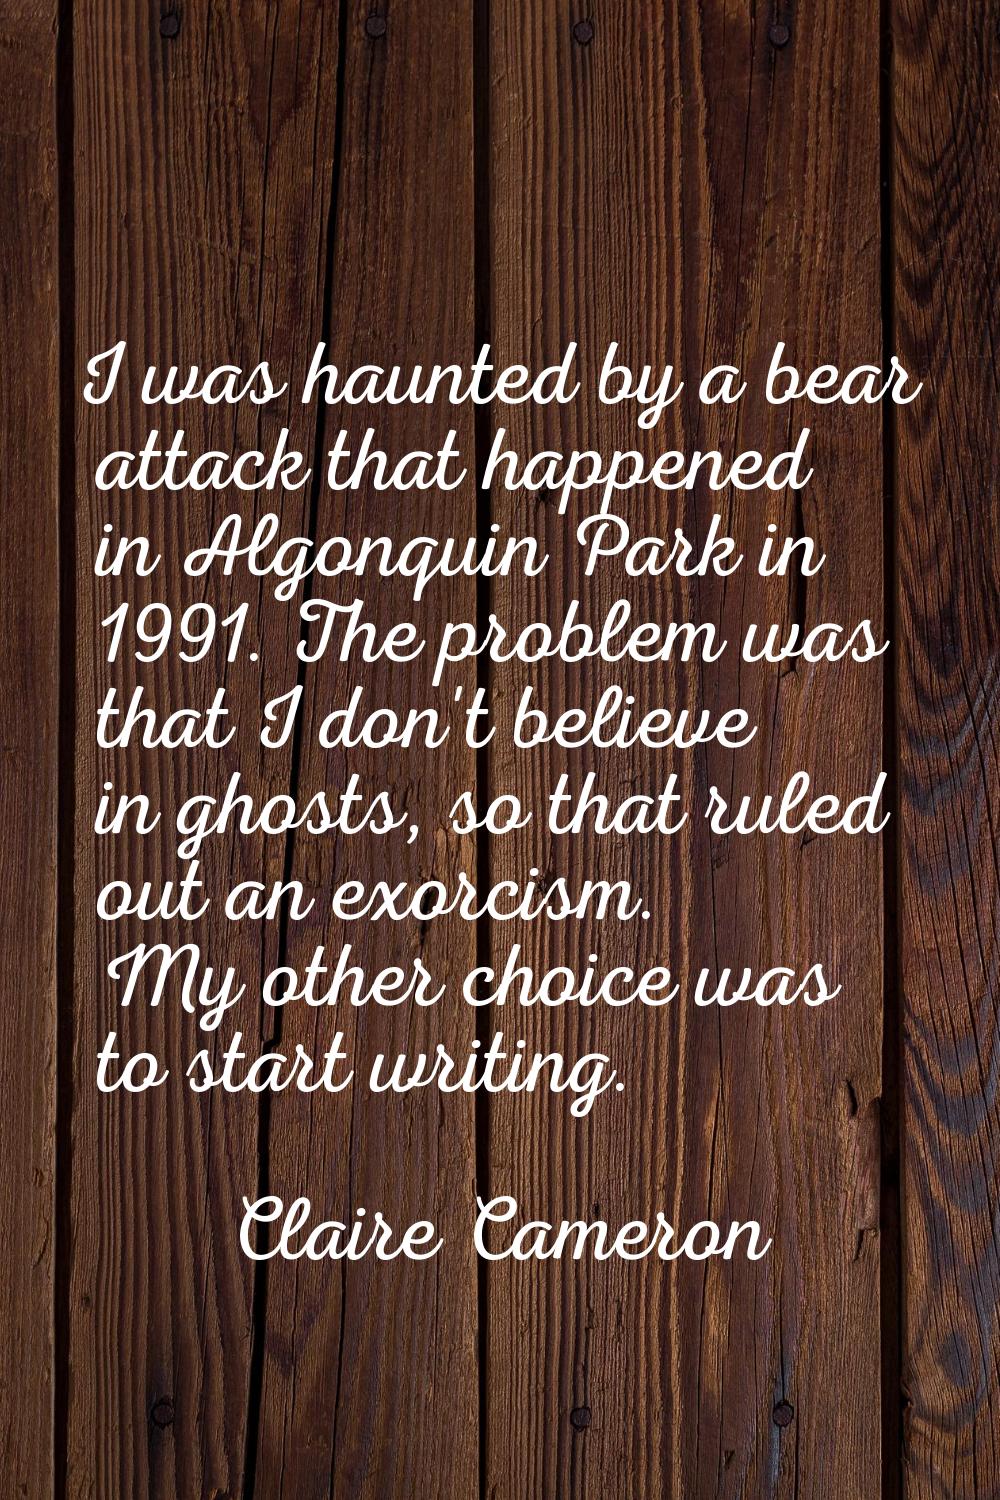 I was haunted by a bear attack that happened in Algonquin Park in 1991. The problem was that I don'